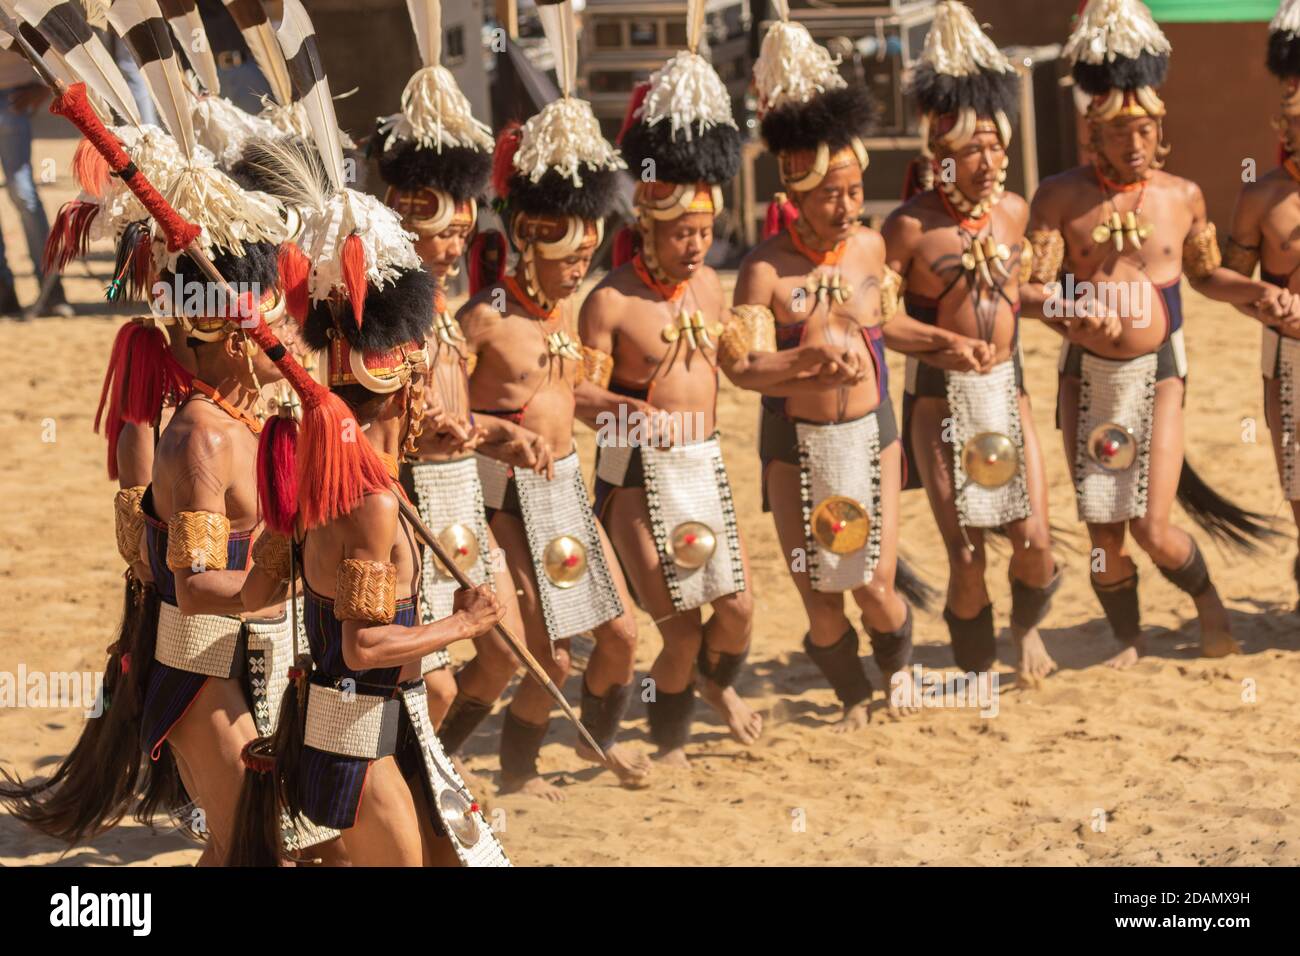 A group of naga tribesmen dressed in their traditional attire dancing during Hornbill festival in Nagaland India on 4 December 2016 Stock Photo